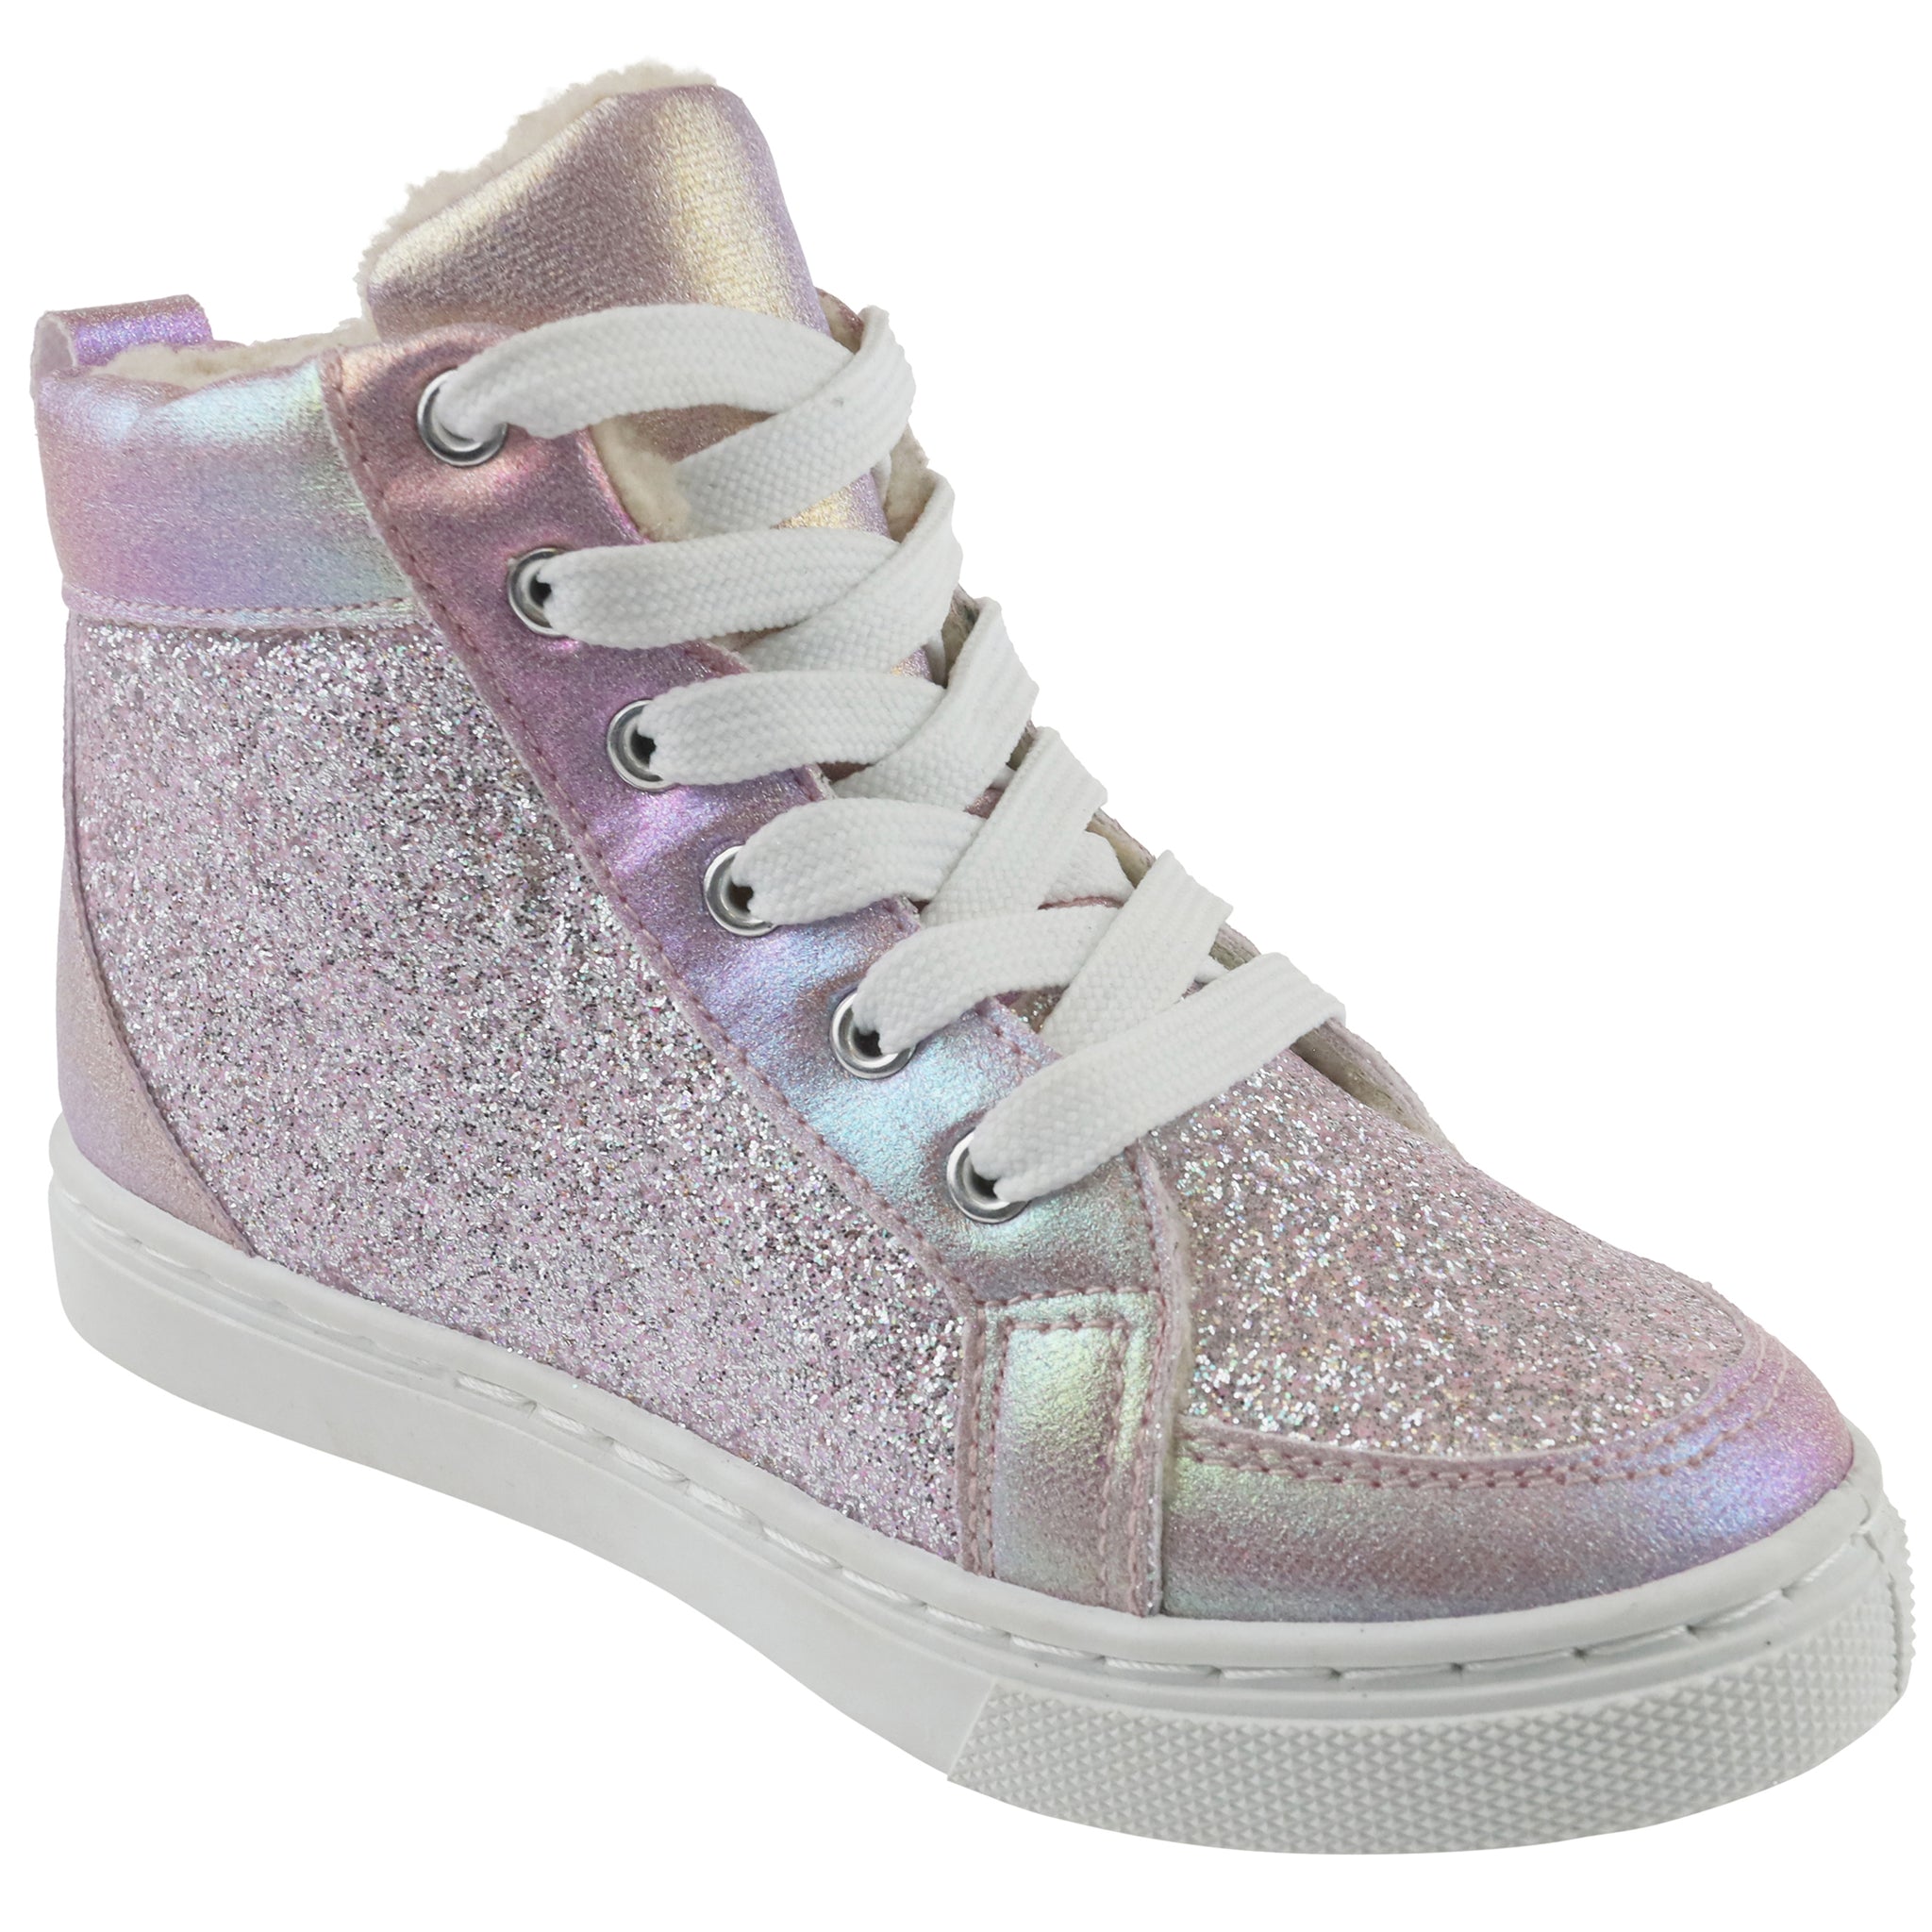 Girls Iridescent Faux Leather Lined High-Top Sneaker